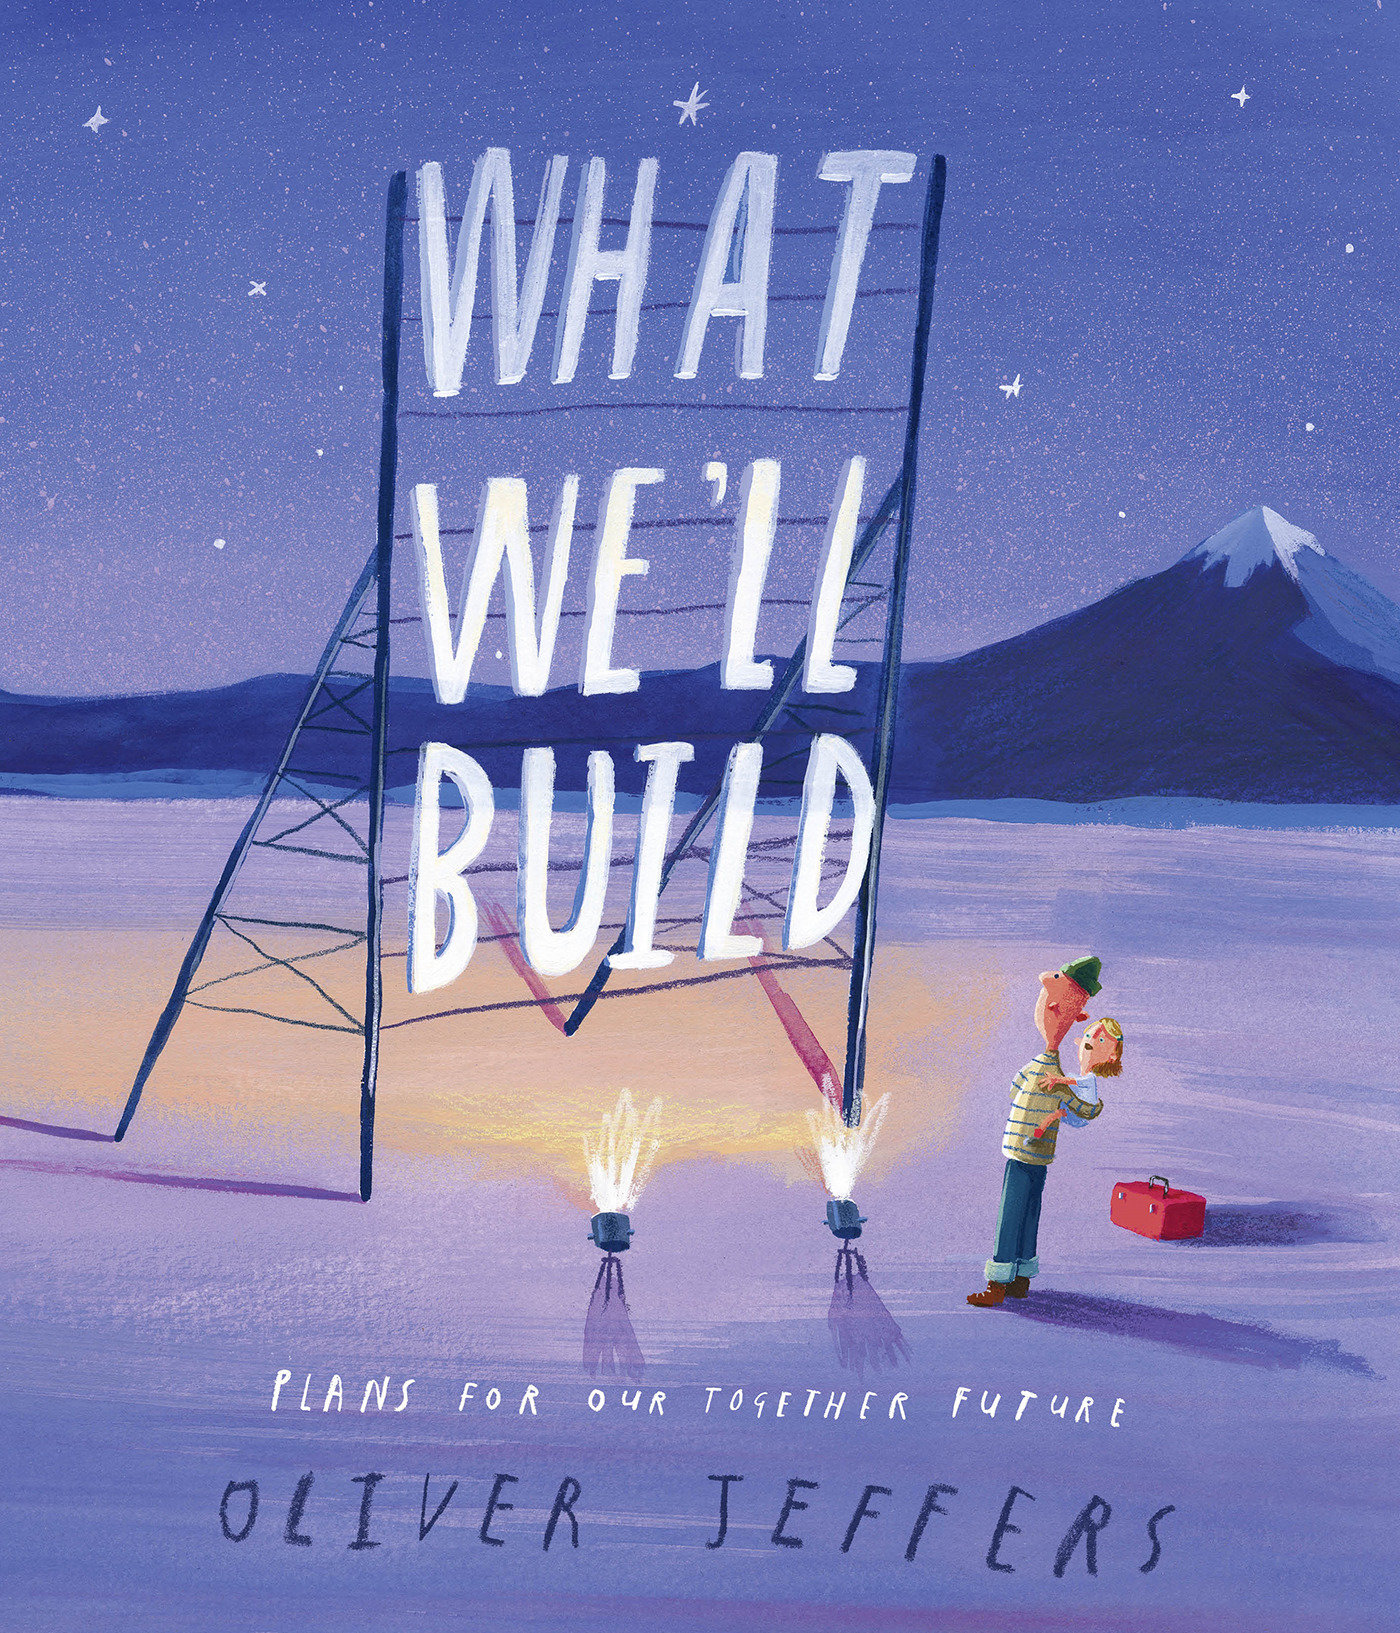 What We'Ll Build (Hardcover Book)